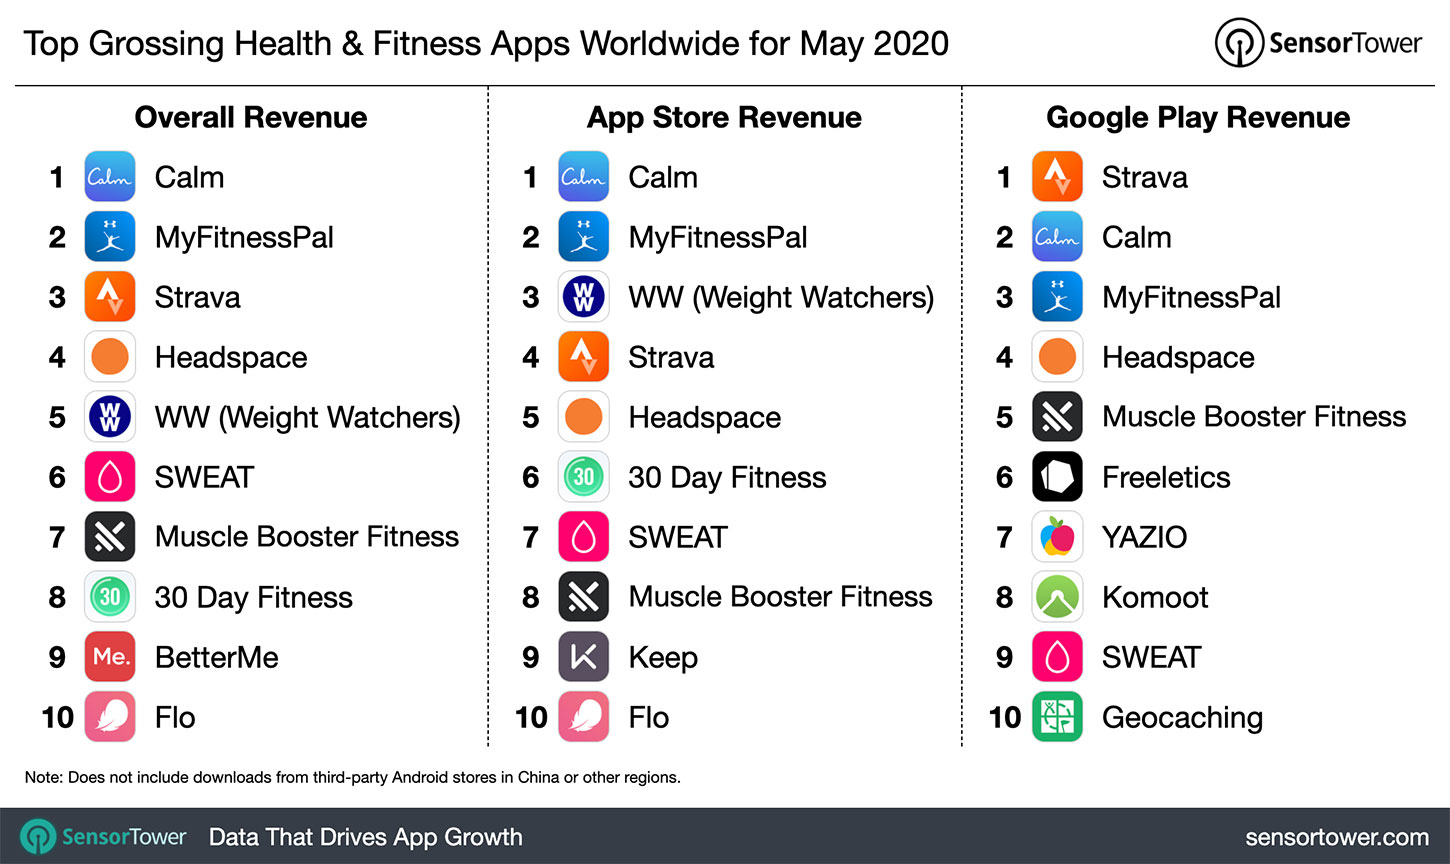 “Top Grossing Health & Fitness category Apps Worldwide for May 2020